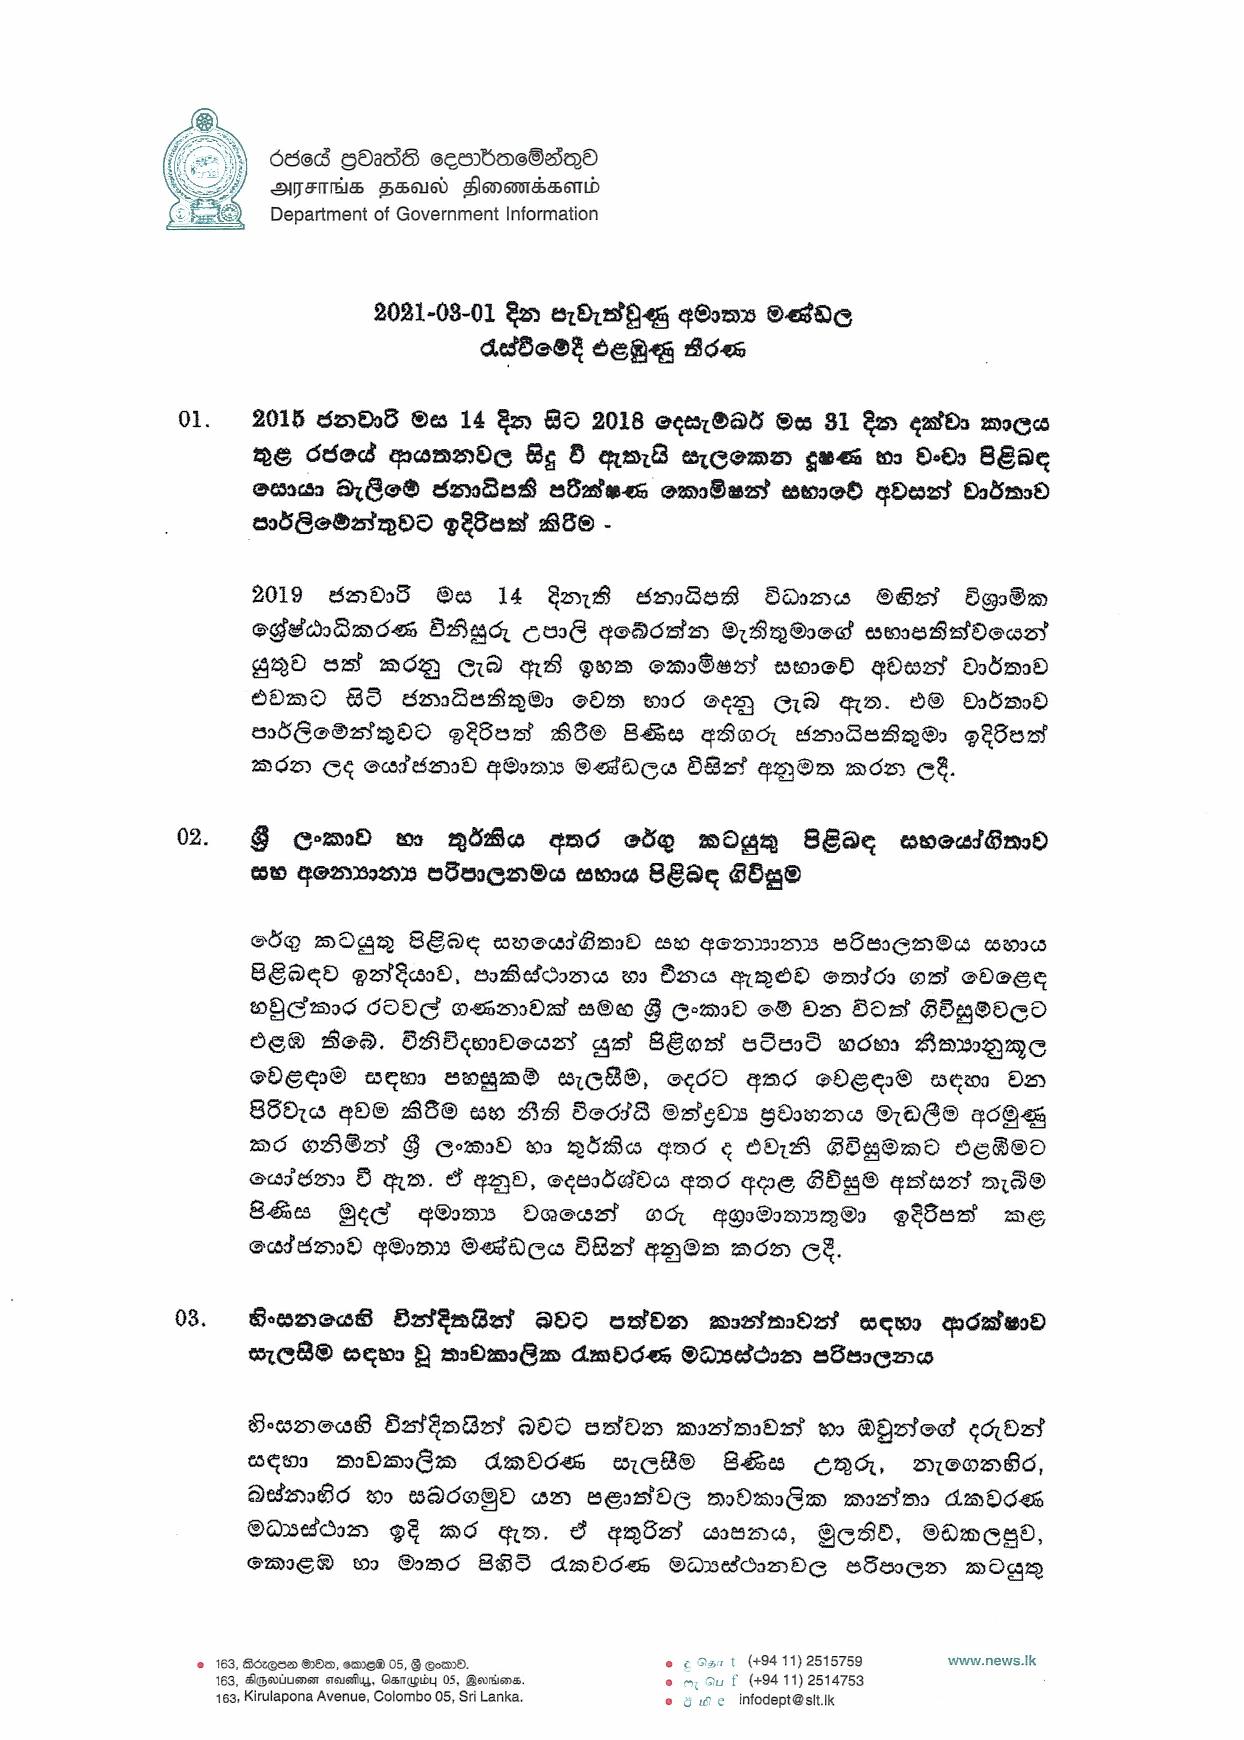 Cabinet Decision on 01.03.2021 page 001